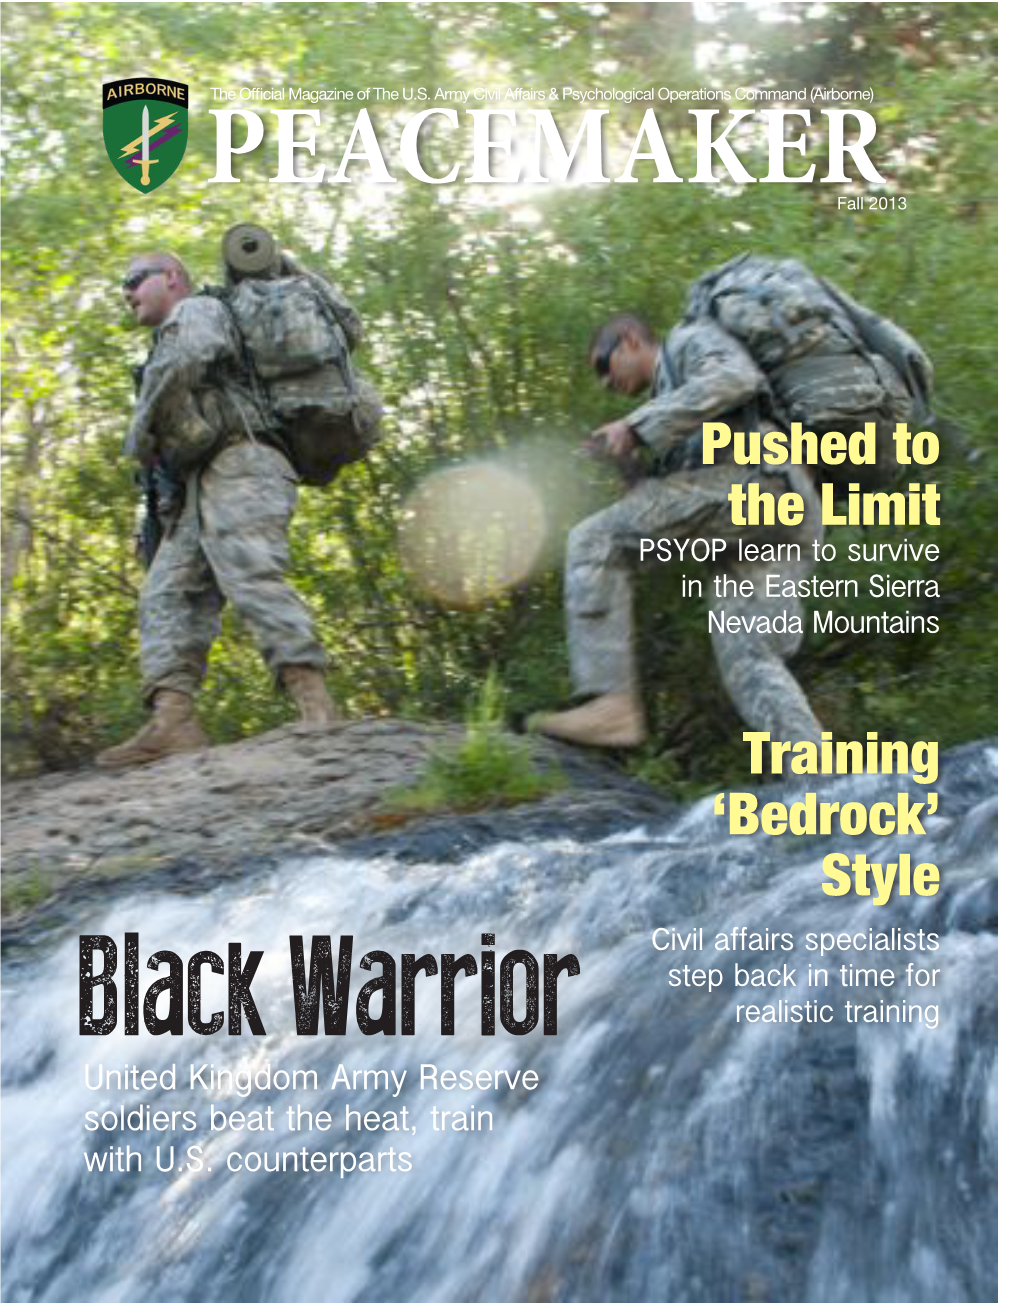 Bedrock’ Style Civil Affairs Specialists Step Back in Time for Realistic Training Black Warrior United Kingdom Army Reserve Soldiers Beat the Heat, Train with U.S